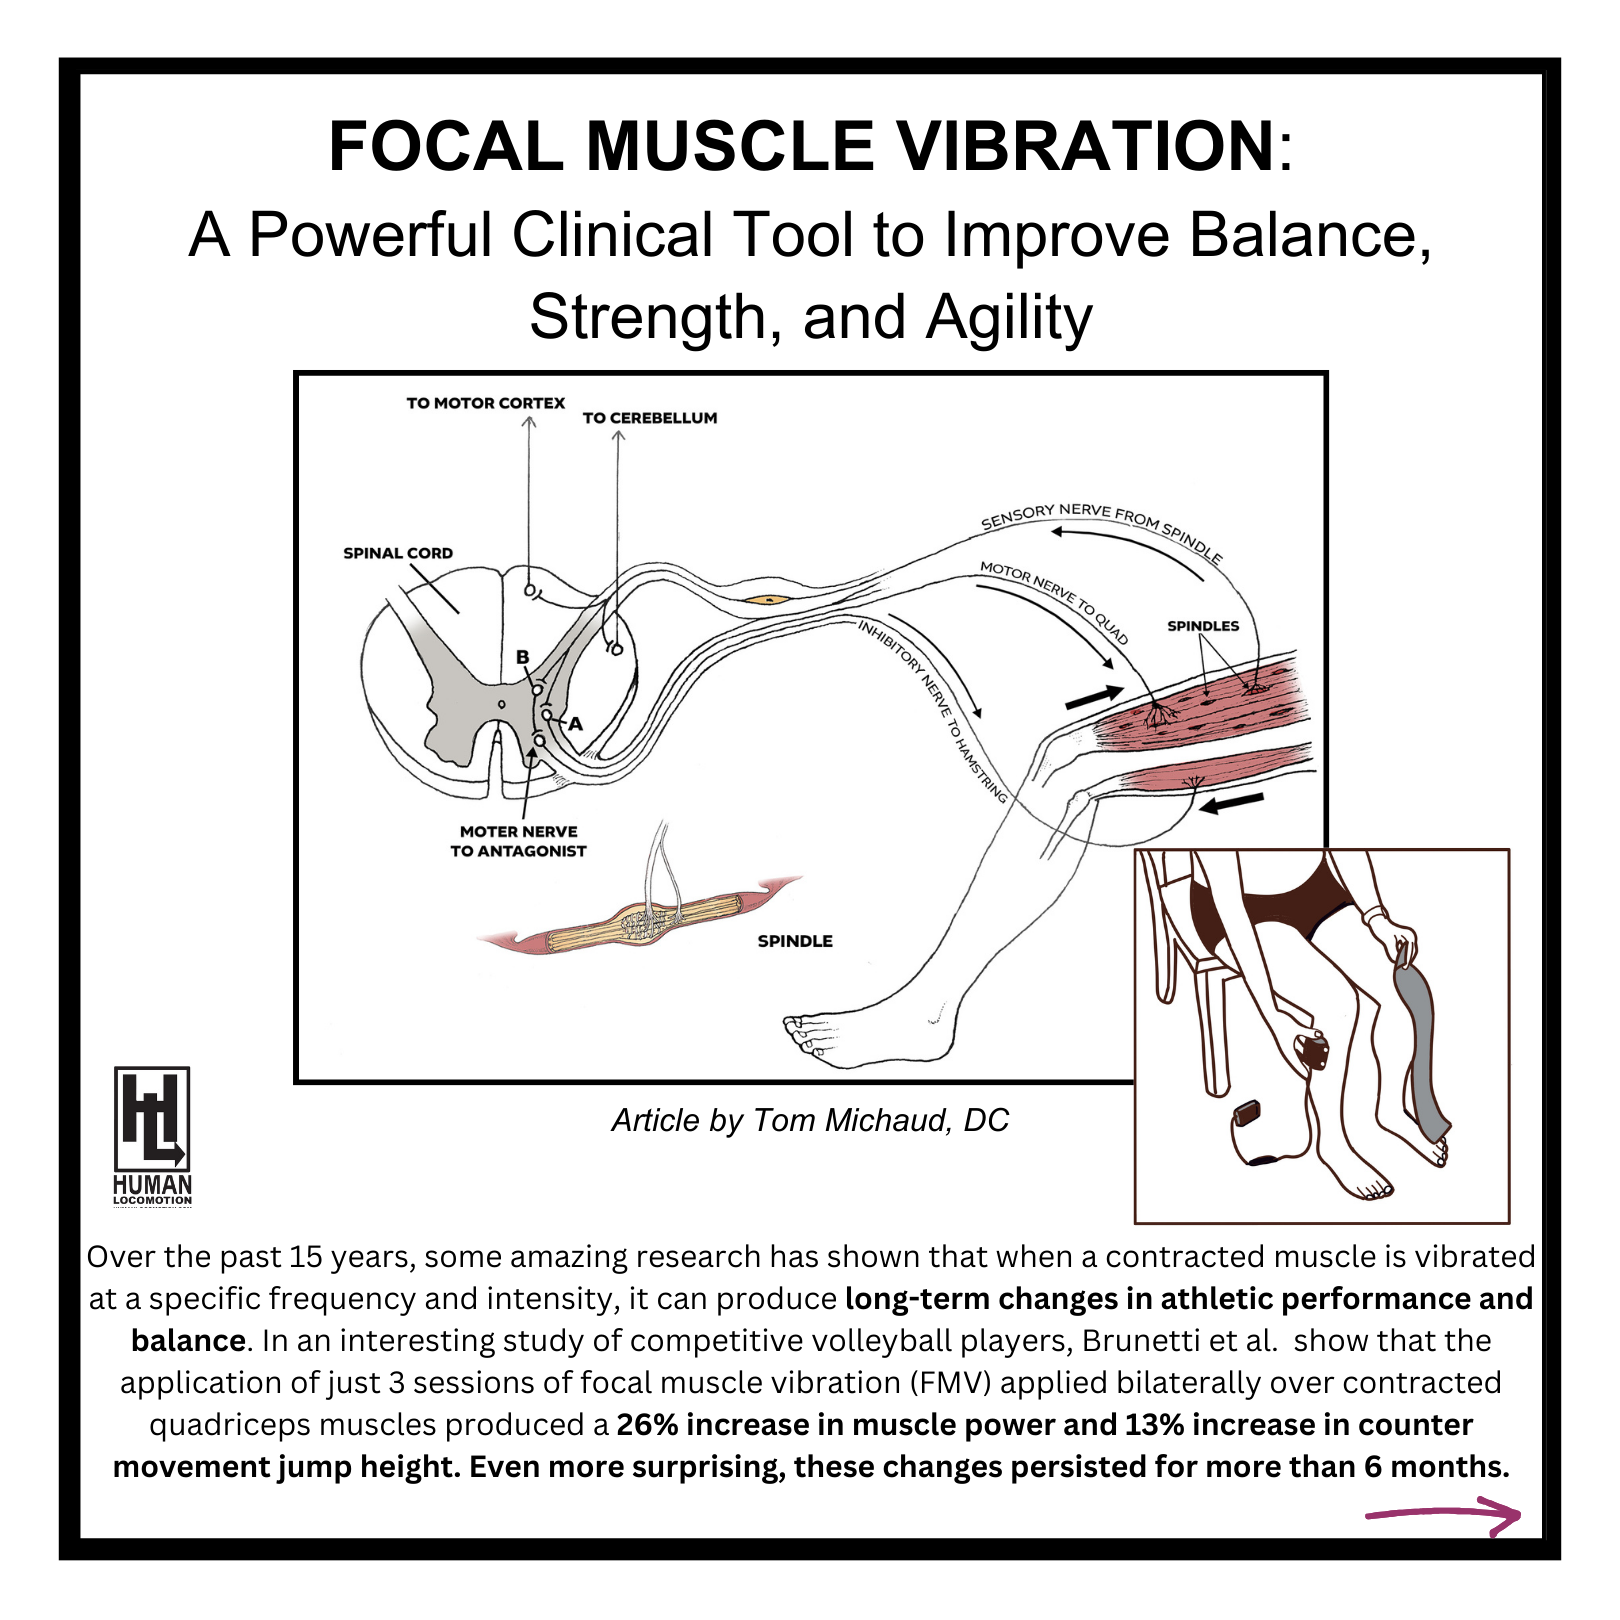 Focal Muscle Vibration: A Powerful Clinical Tool to Improve Balance, Strength, and Agility